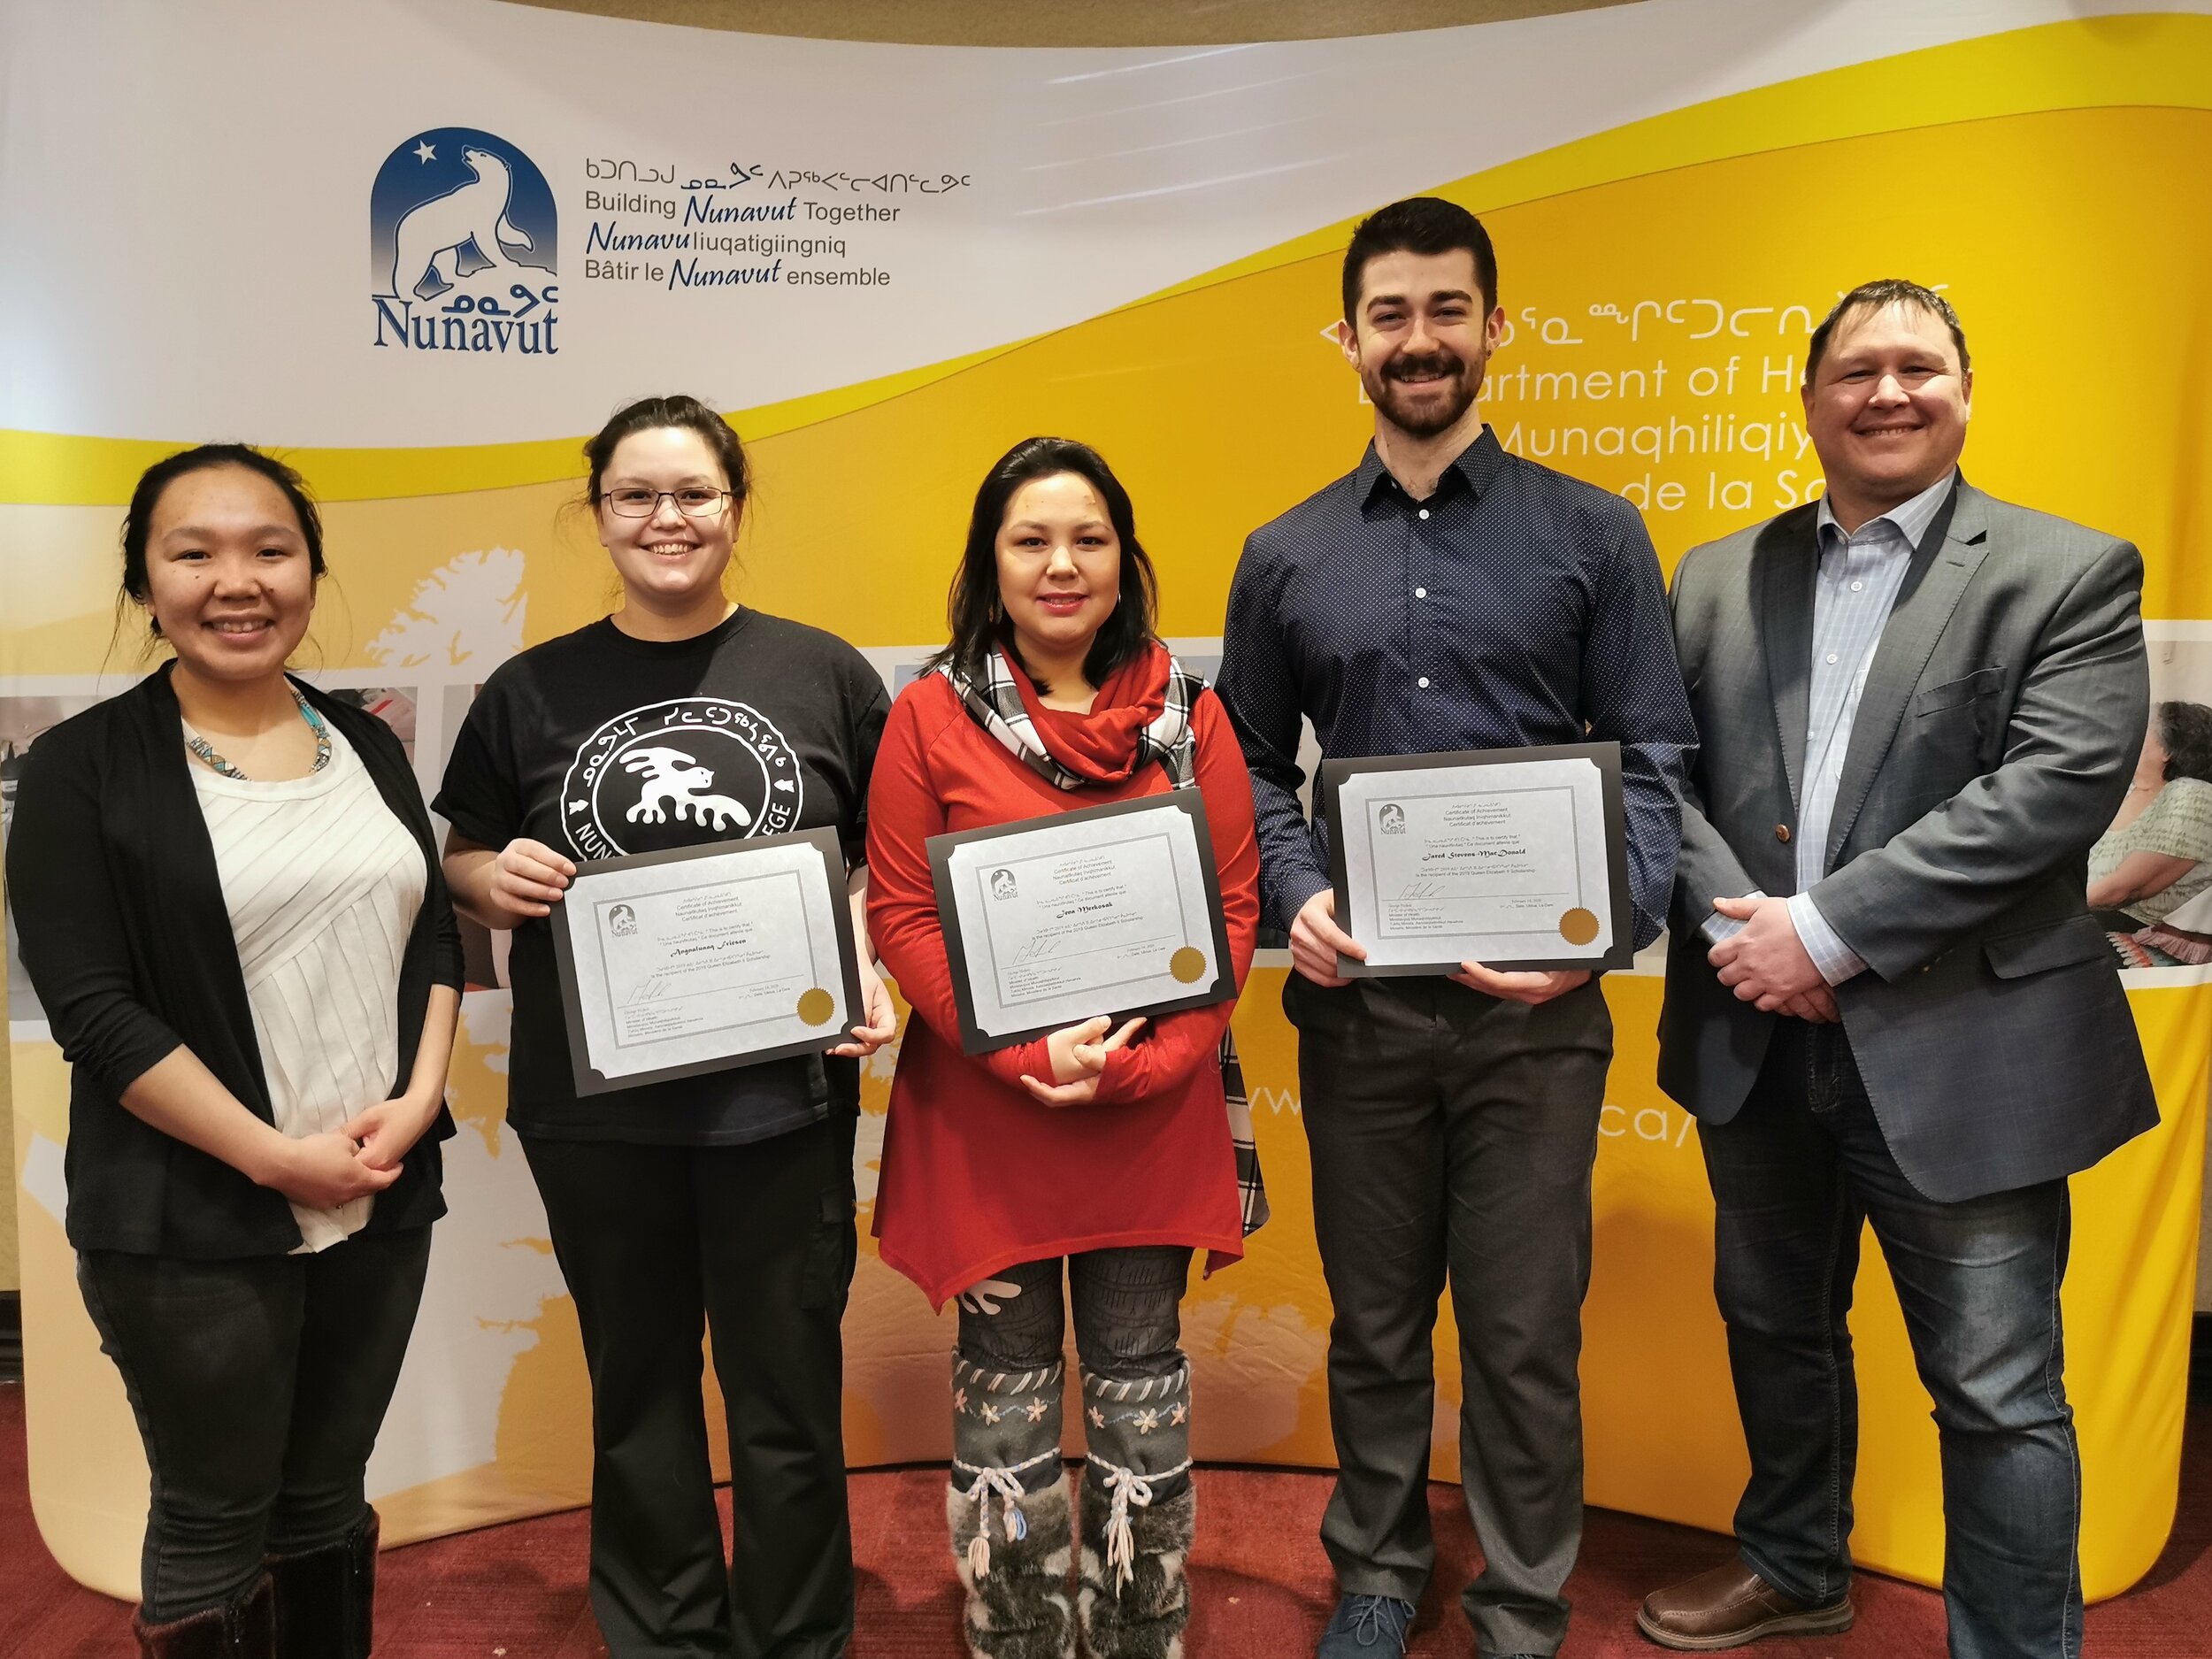   From left to right: Joanne Idlout, Agnaluak Fraisen, Jenna Merkosak, Jared Stevens-McDonald, Minister of Health, George Hickes. Not in the picture: Amy Clark, Amiel HErnandez and Sapatie Stokes.  